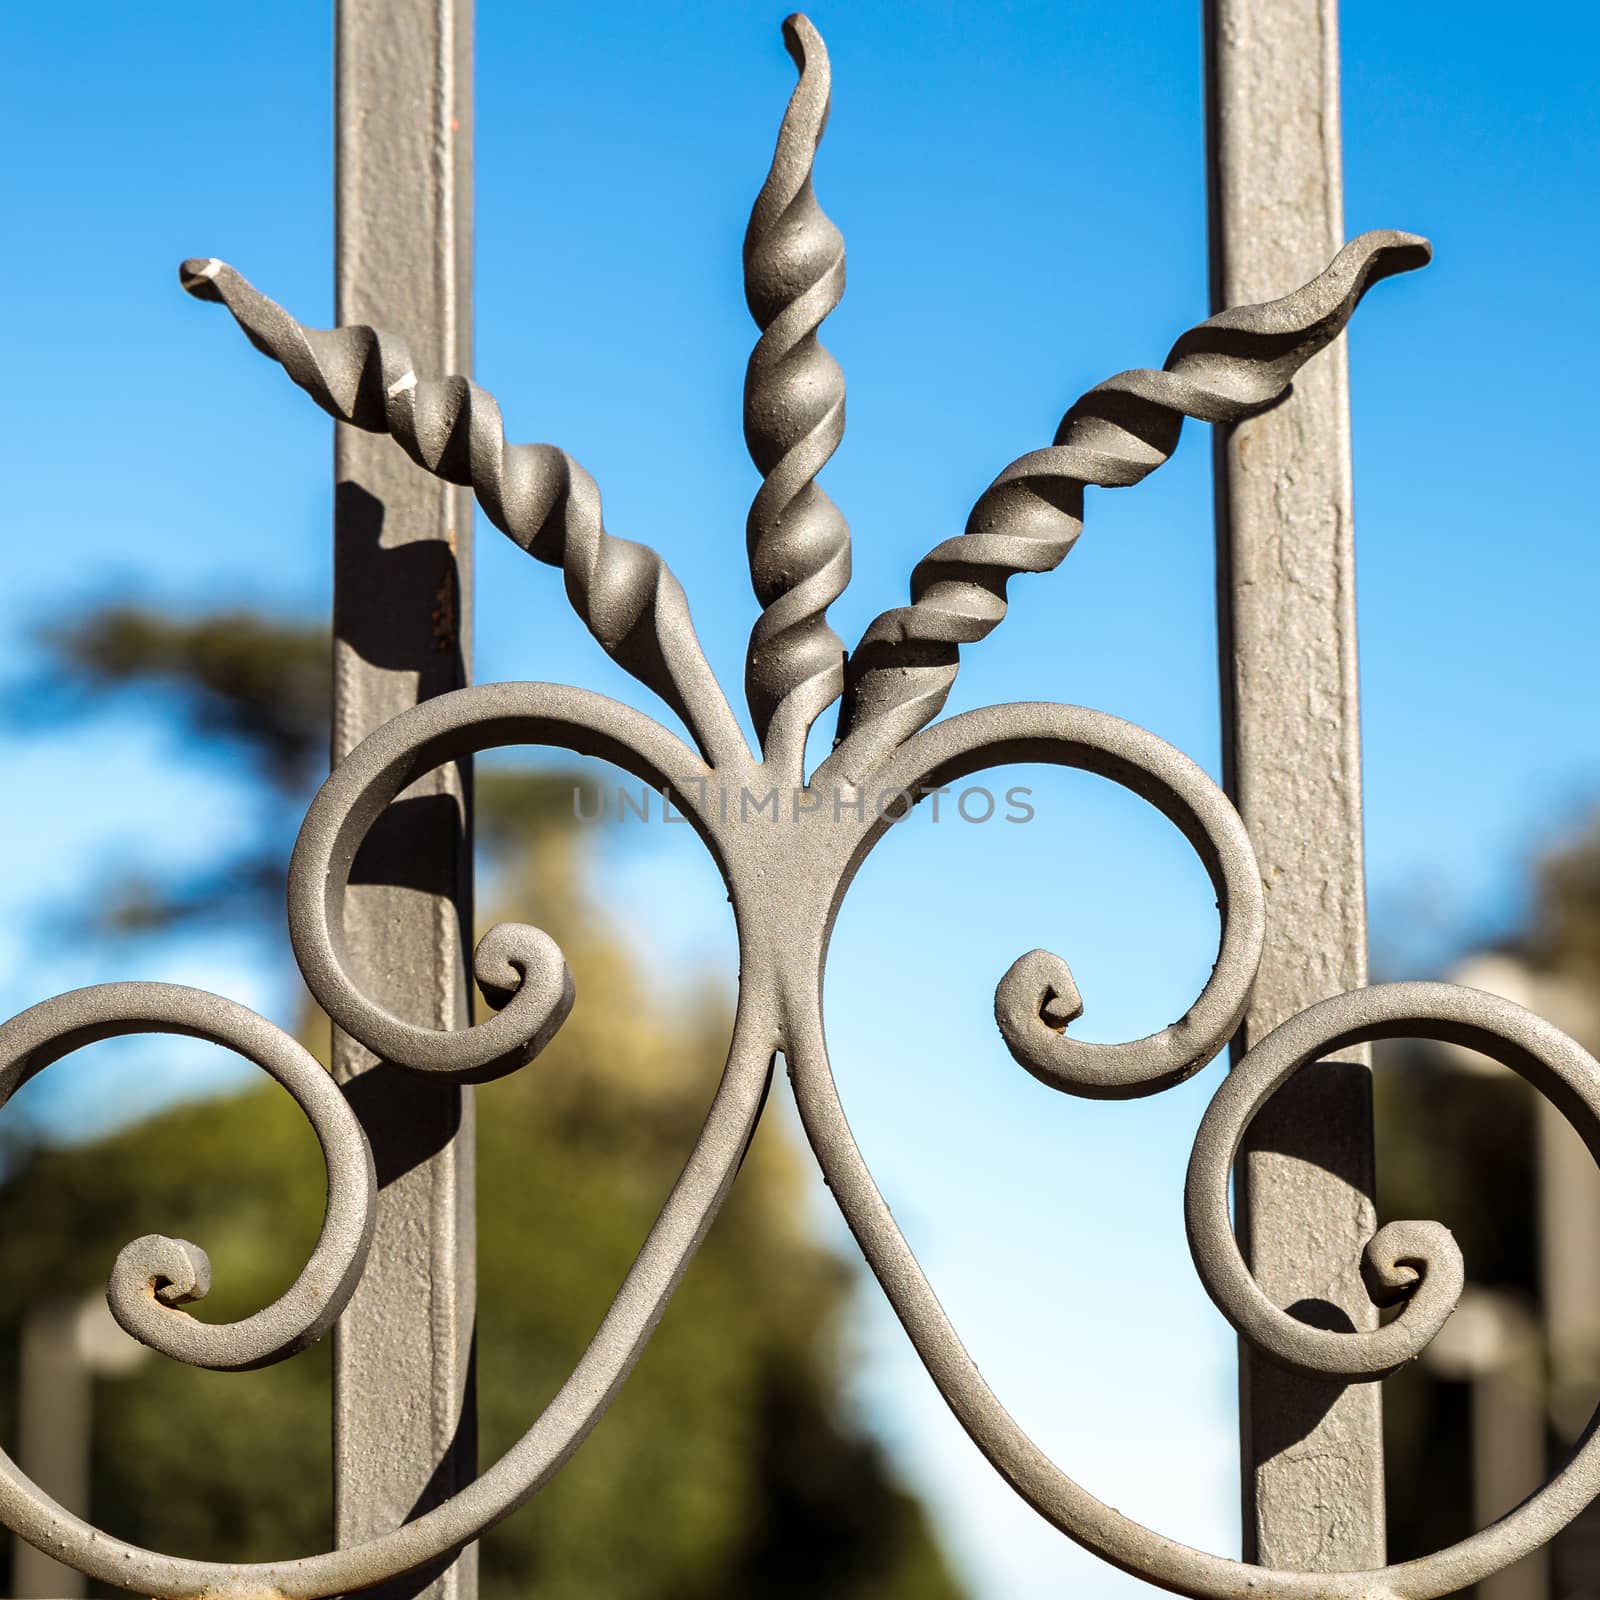 artistic wrought iron in an ancient Sicilian gate